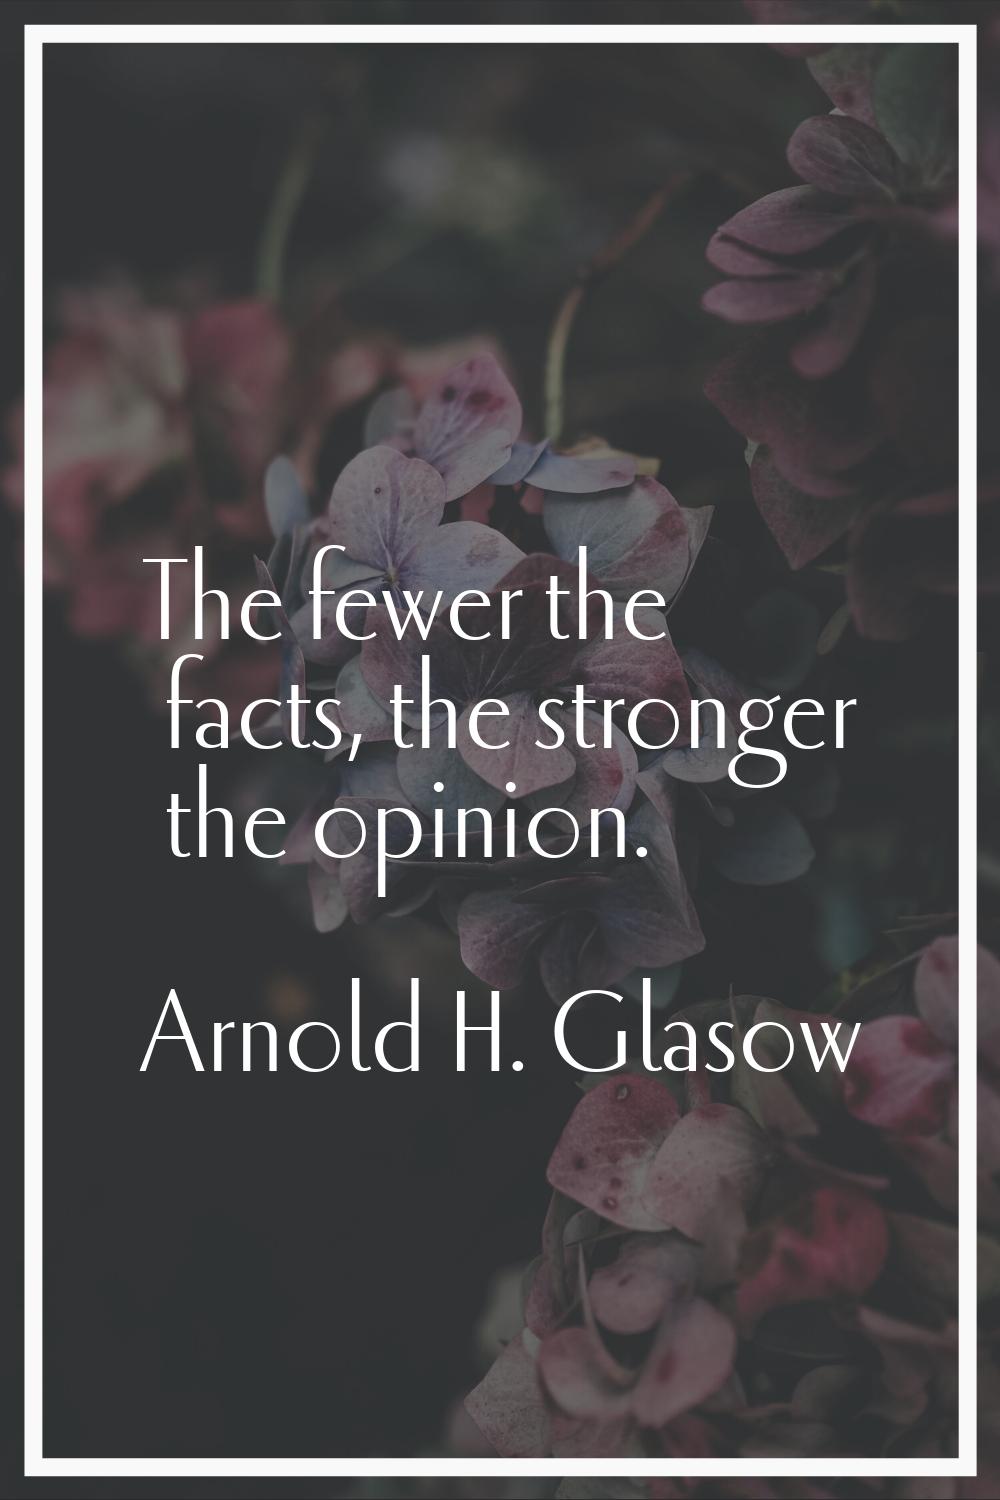 The fewer the facts, the stronger the opinion.